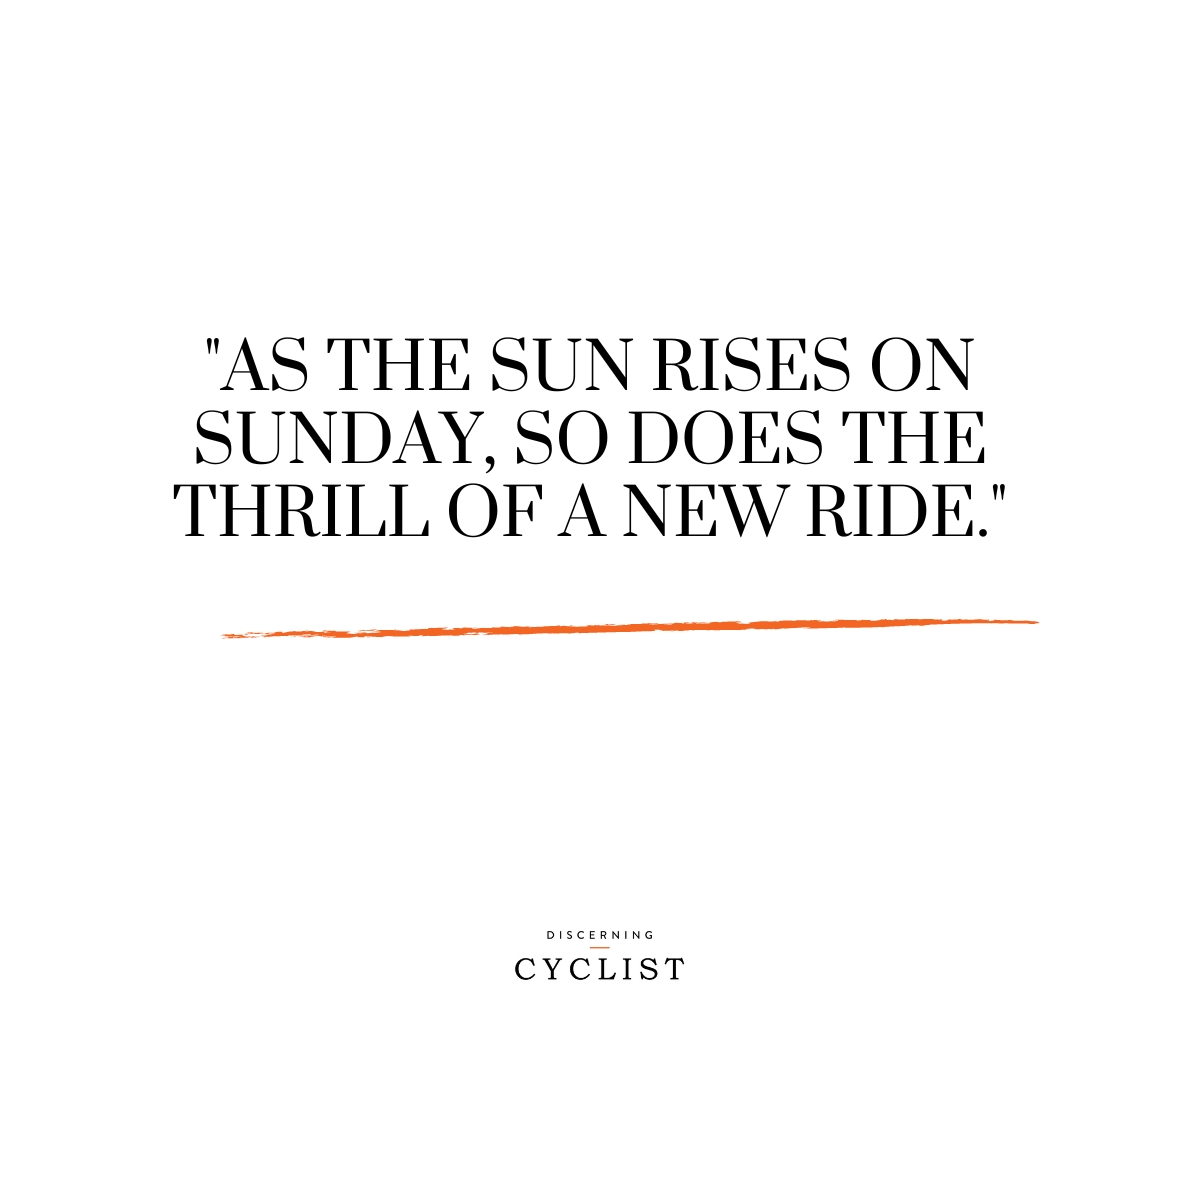 "As the sun rises on Sunday, so does the thrill of a new ride."